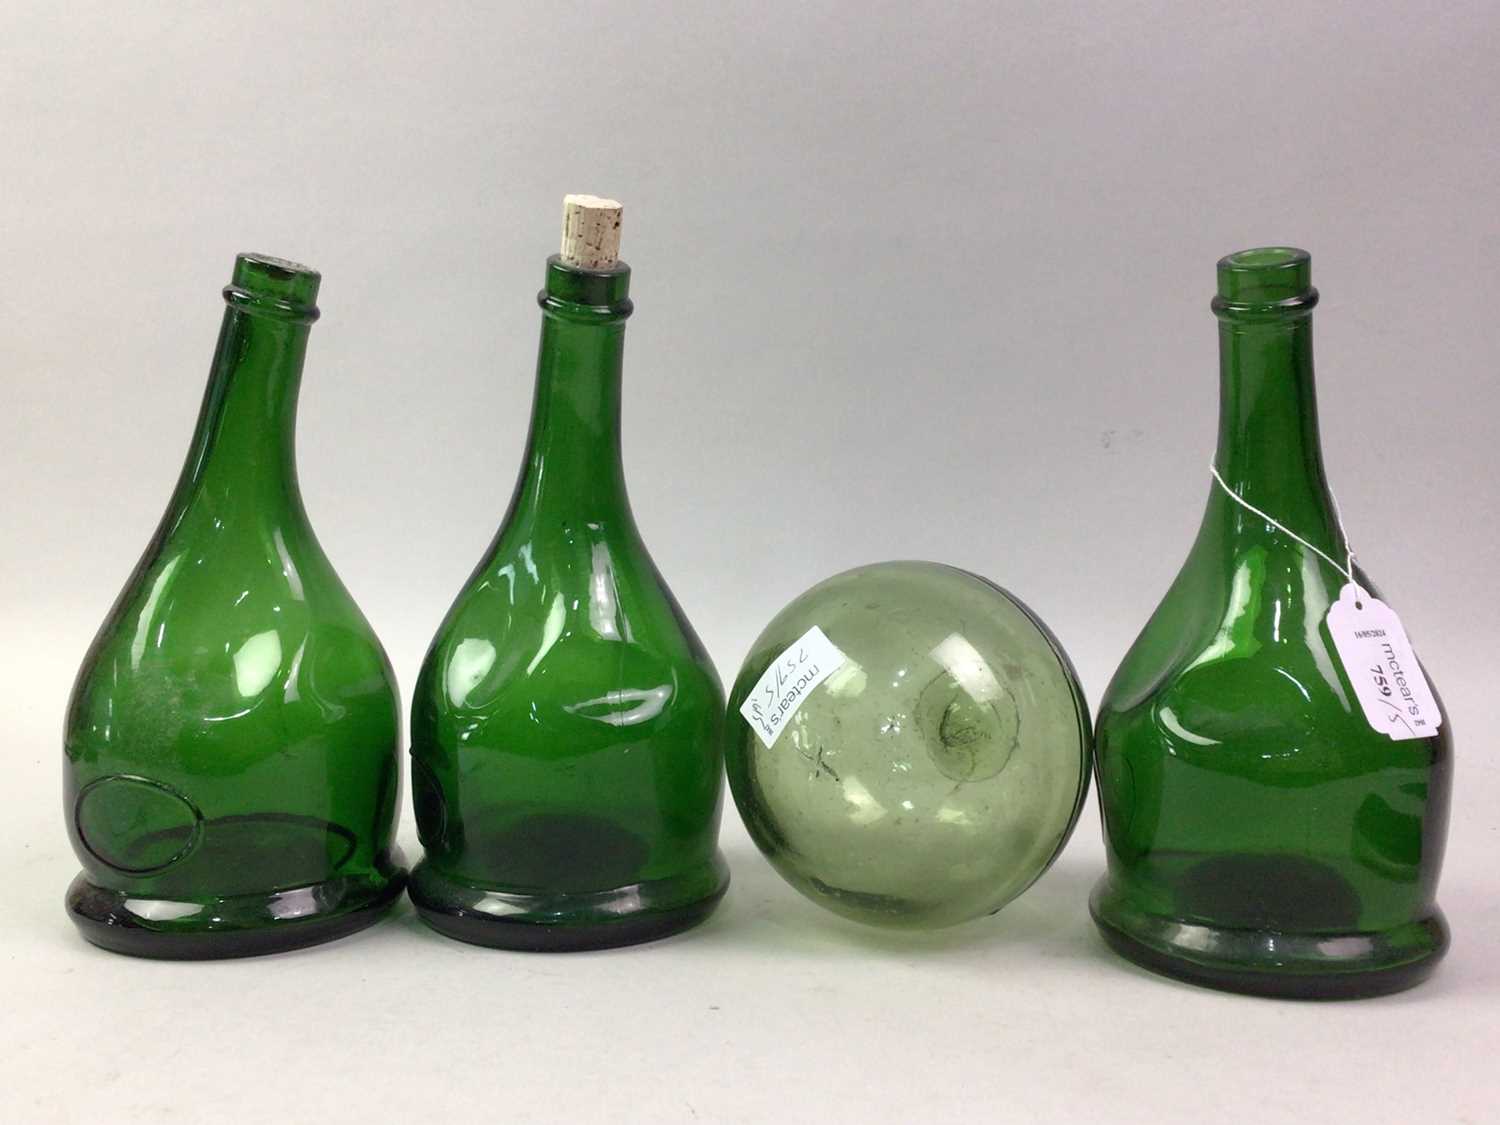 GROUP OF FOUR BOTTLES, ALONG WITH A GLASS FISHING FLOAT - Image 2 of 3